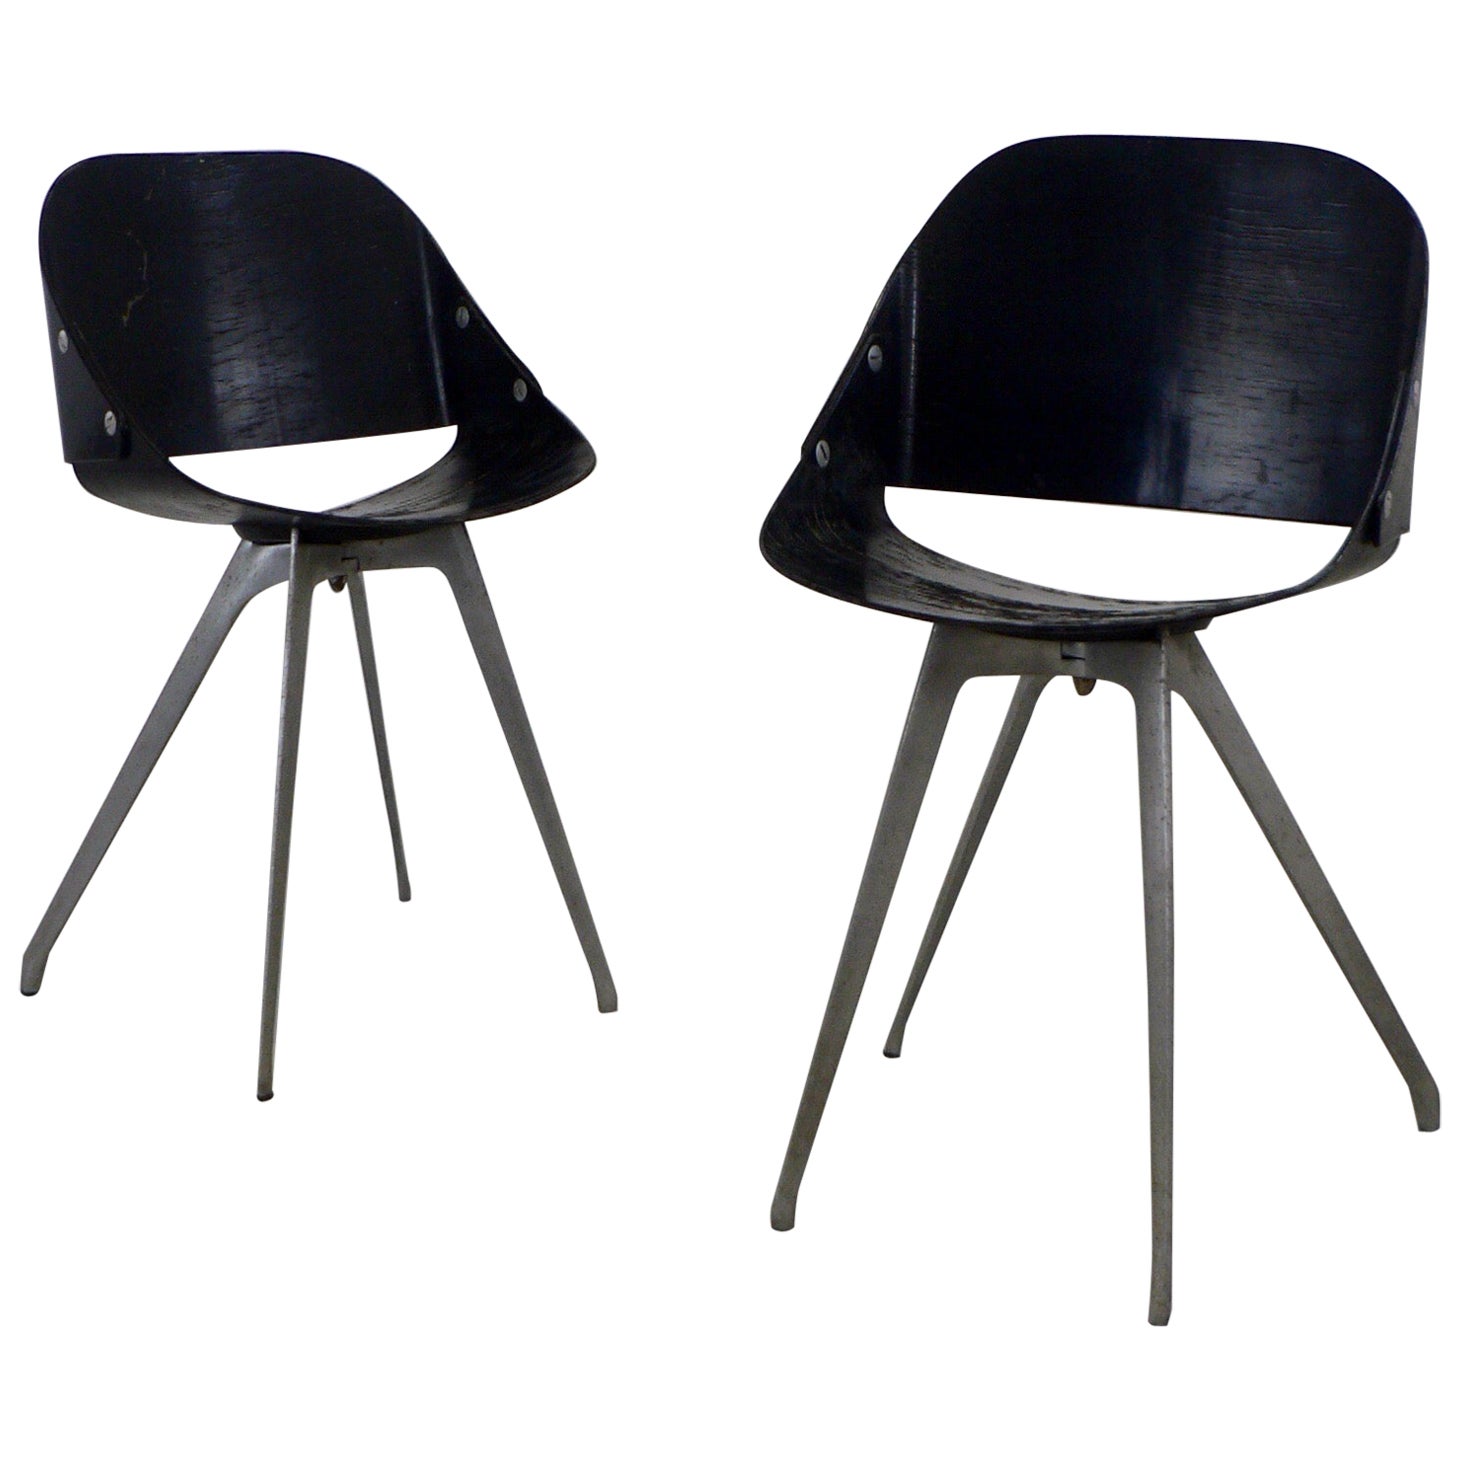 Roger Tallon "Wimpy" chairs, set of 2 - Sentou. For Sale